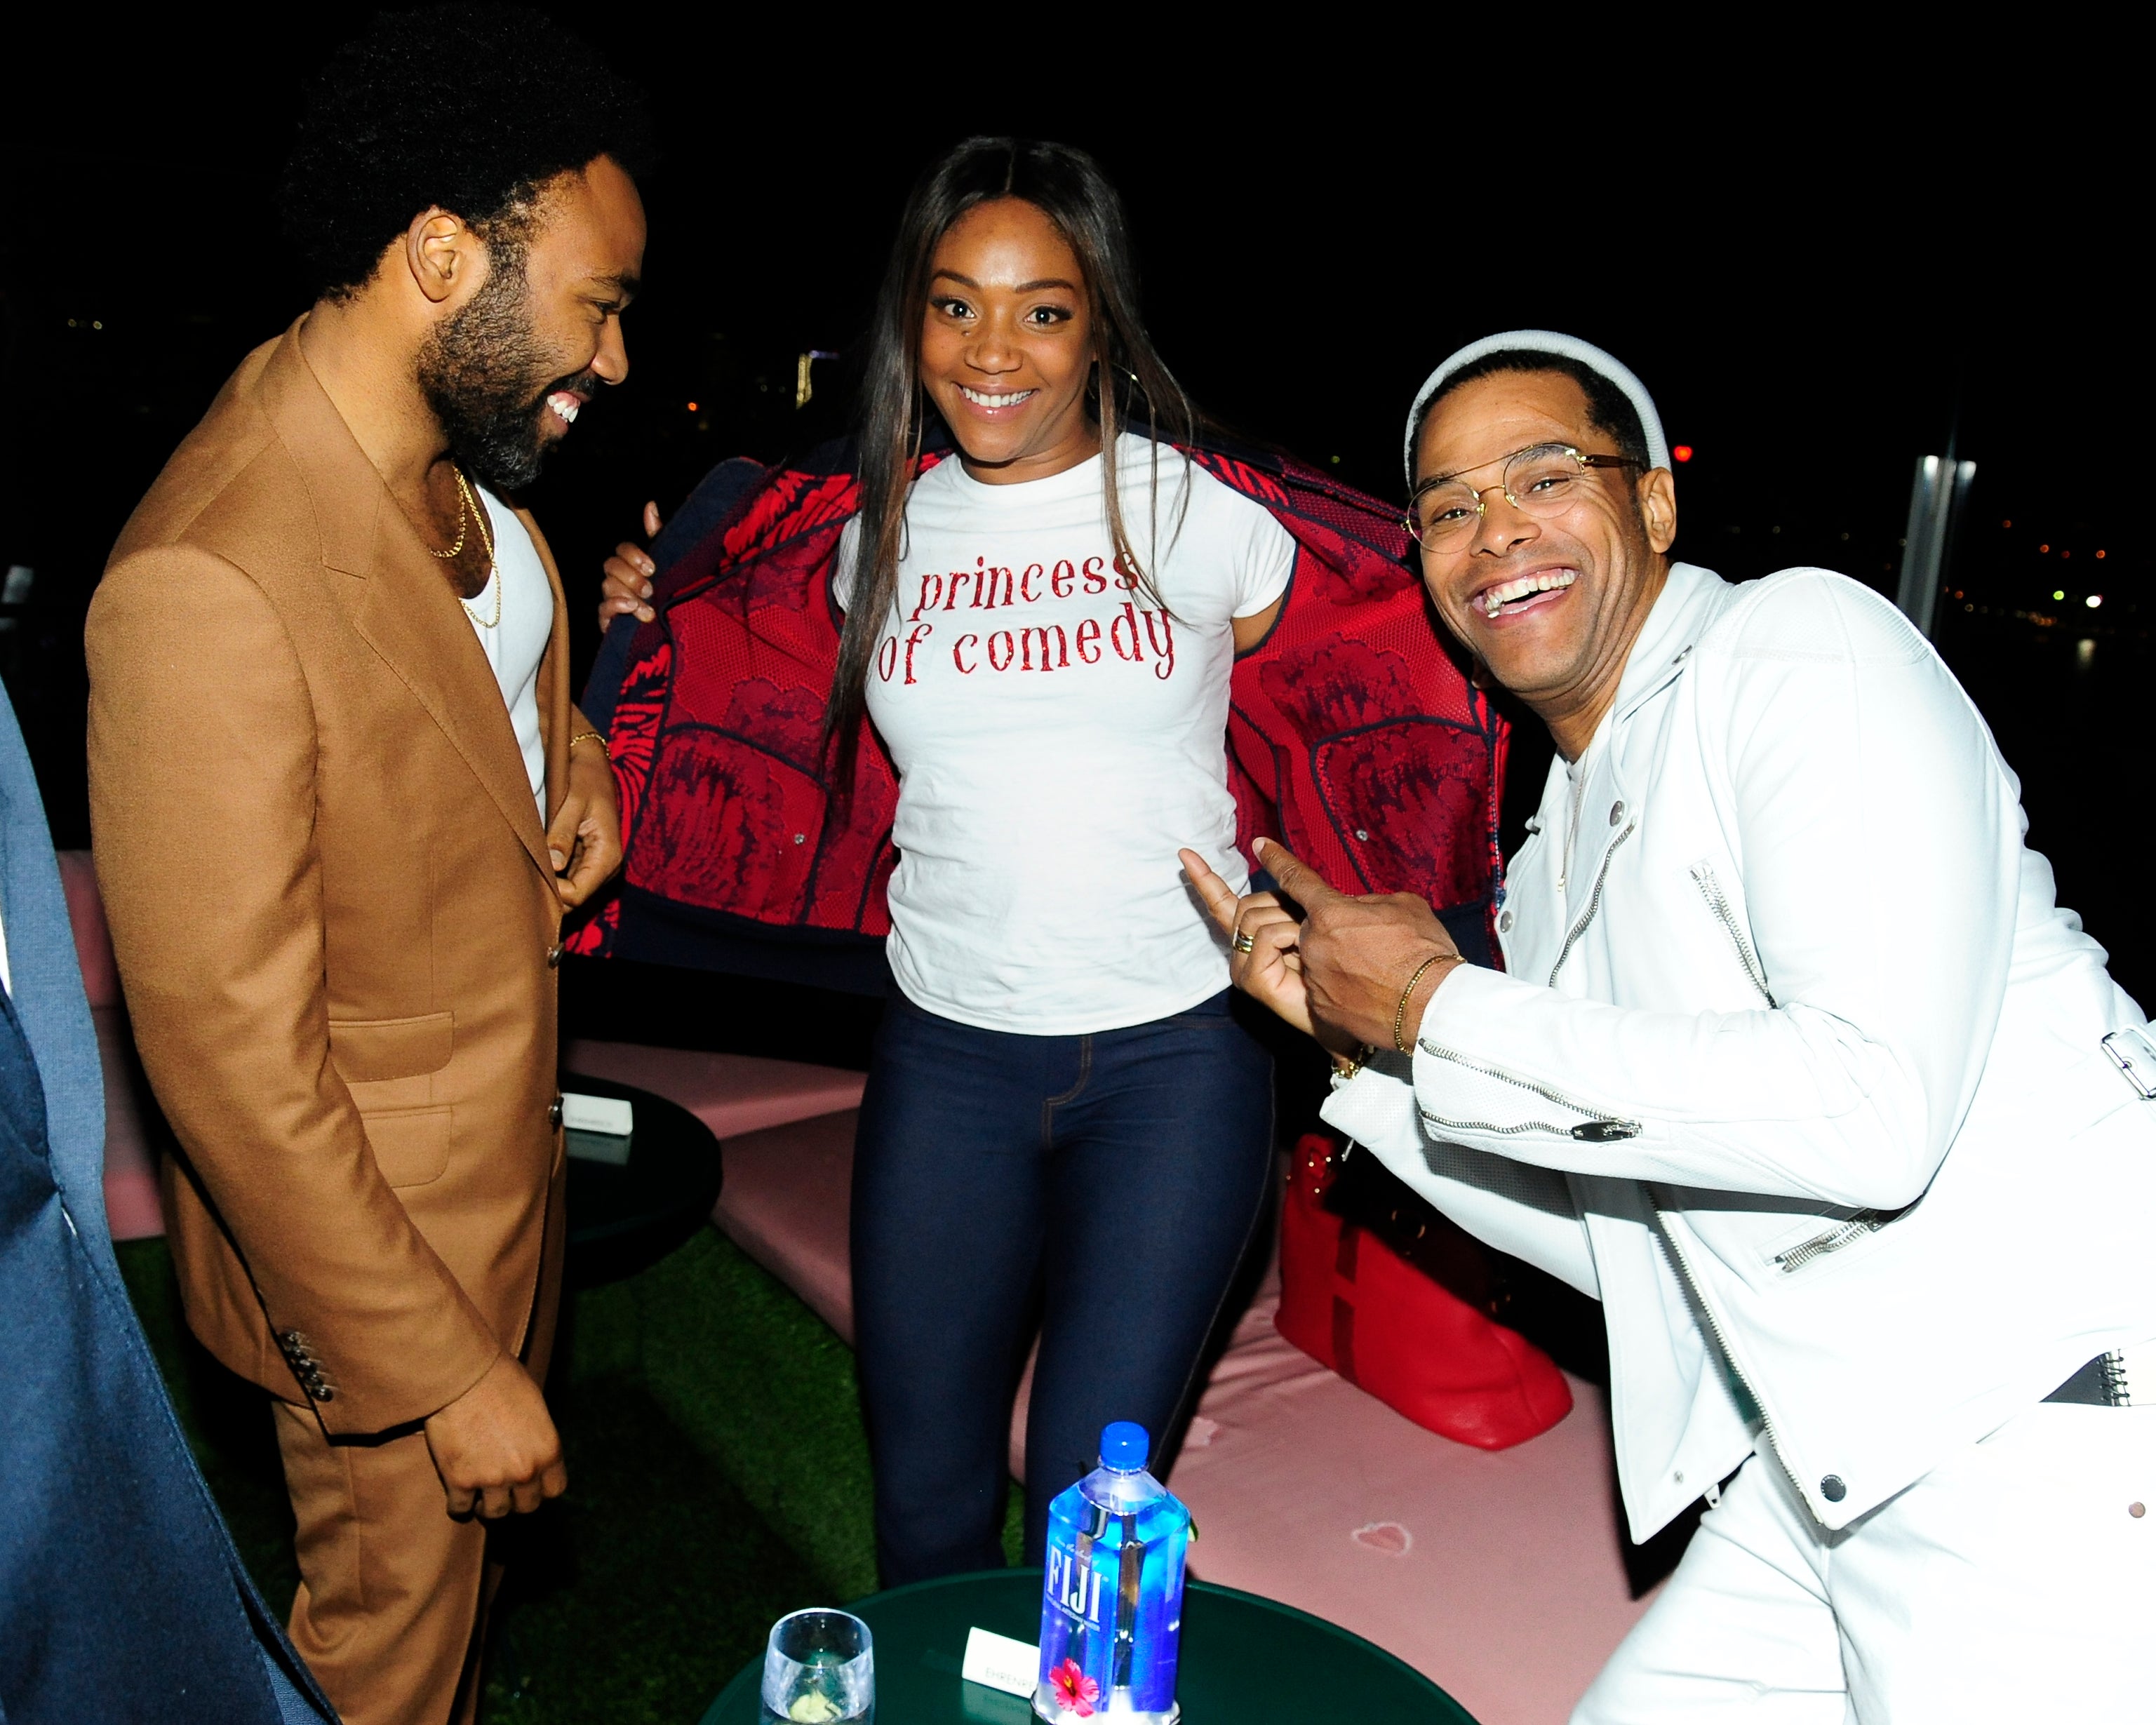 Angela Simmons, Queen Latifah, Teyana Taylor and More Celebs Out and About
